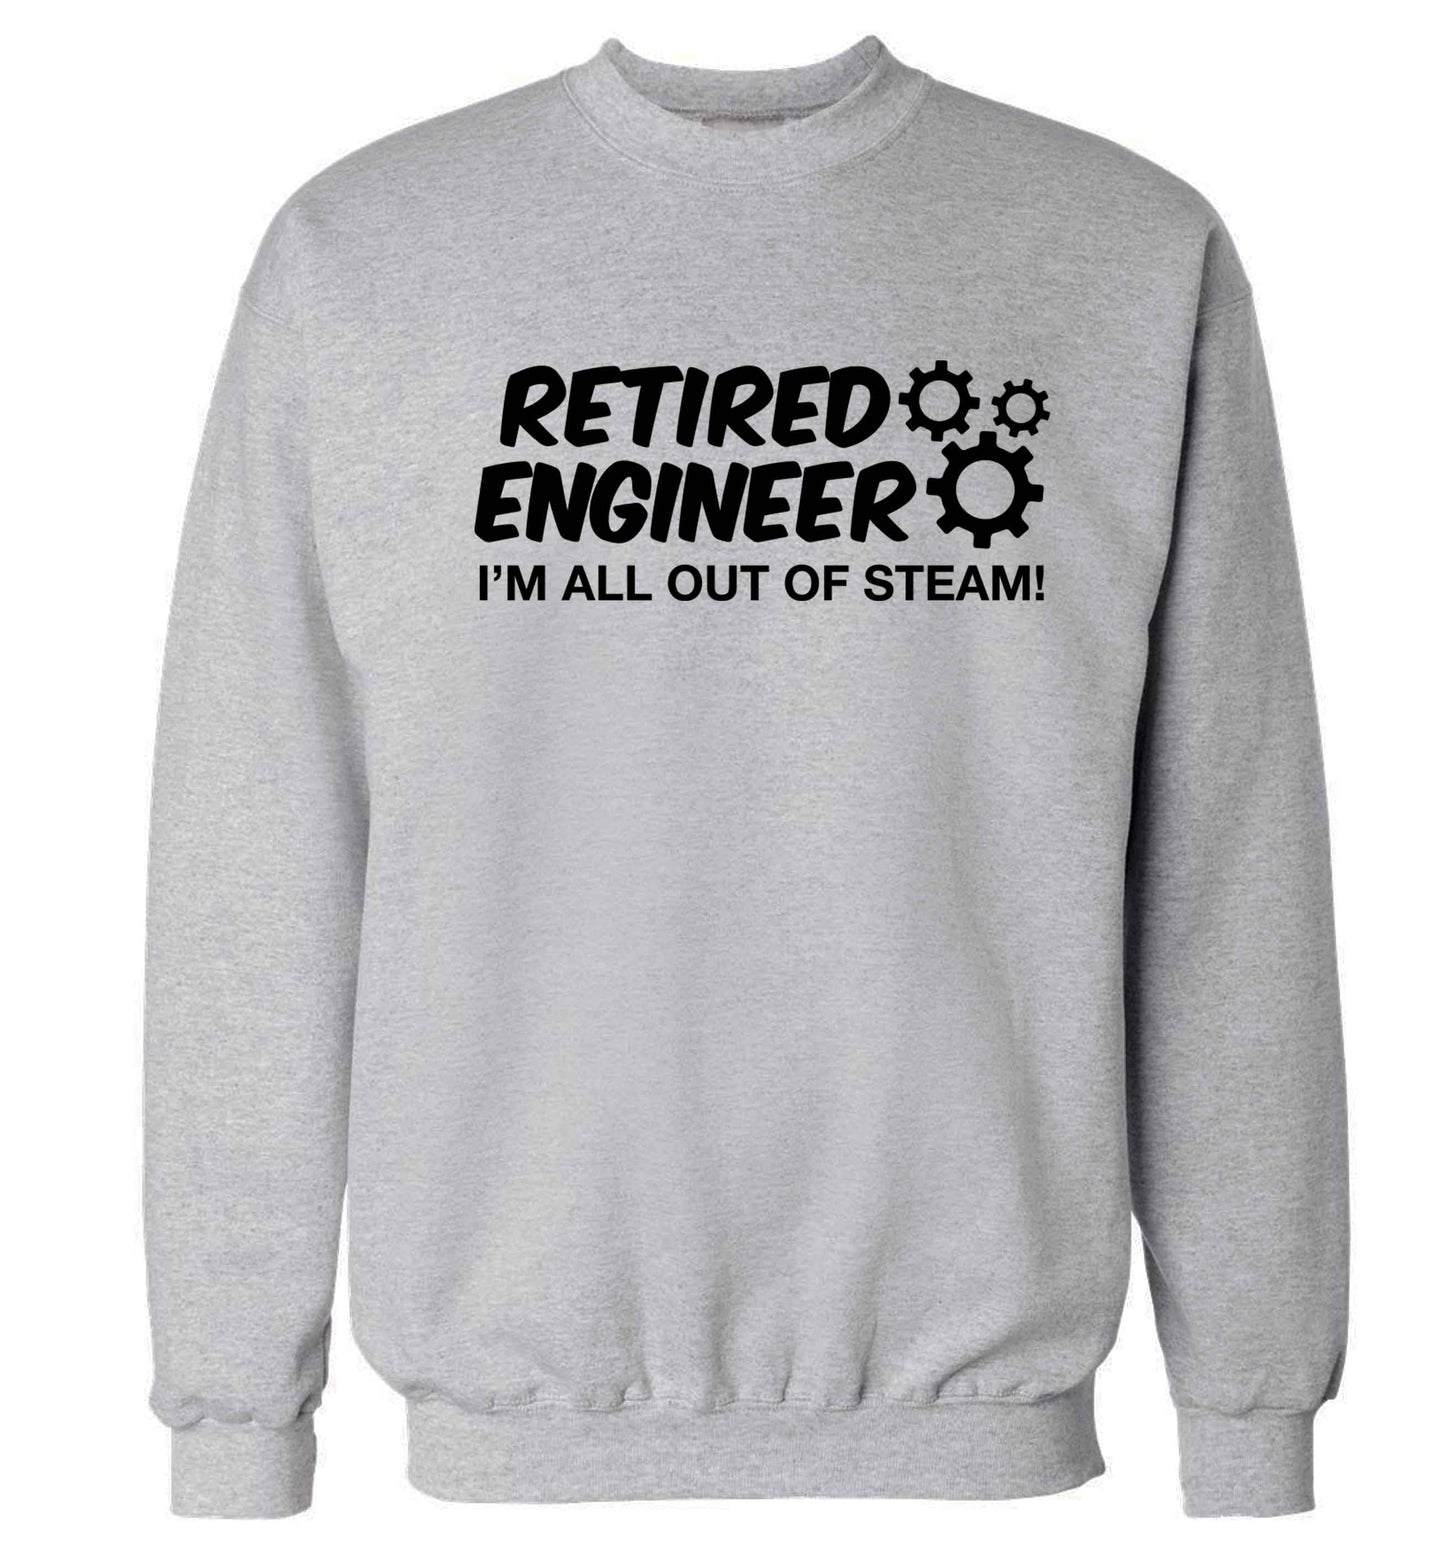 Retired engineer I'm all out of steam Adult's unisex grey Sweater 2XL